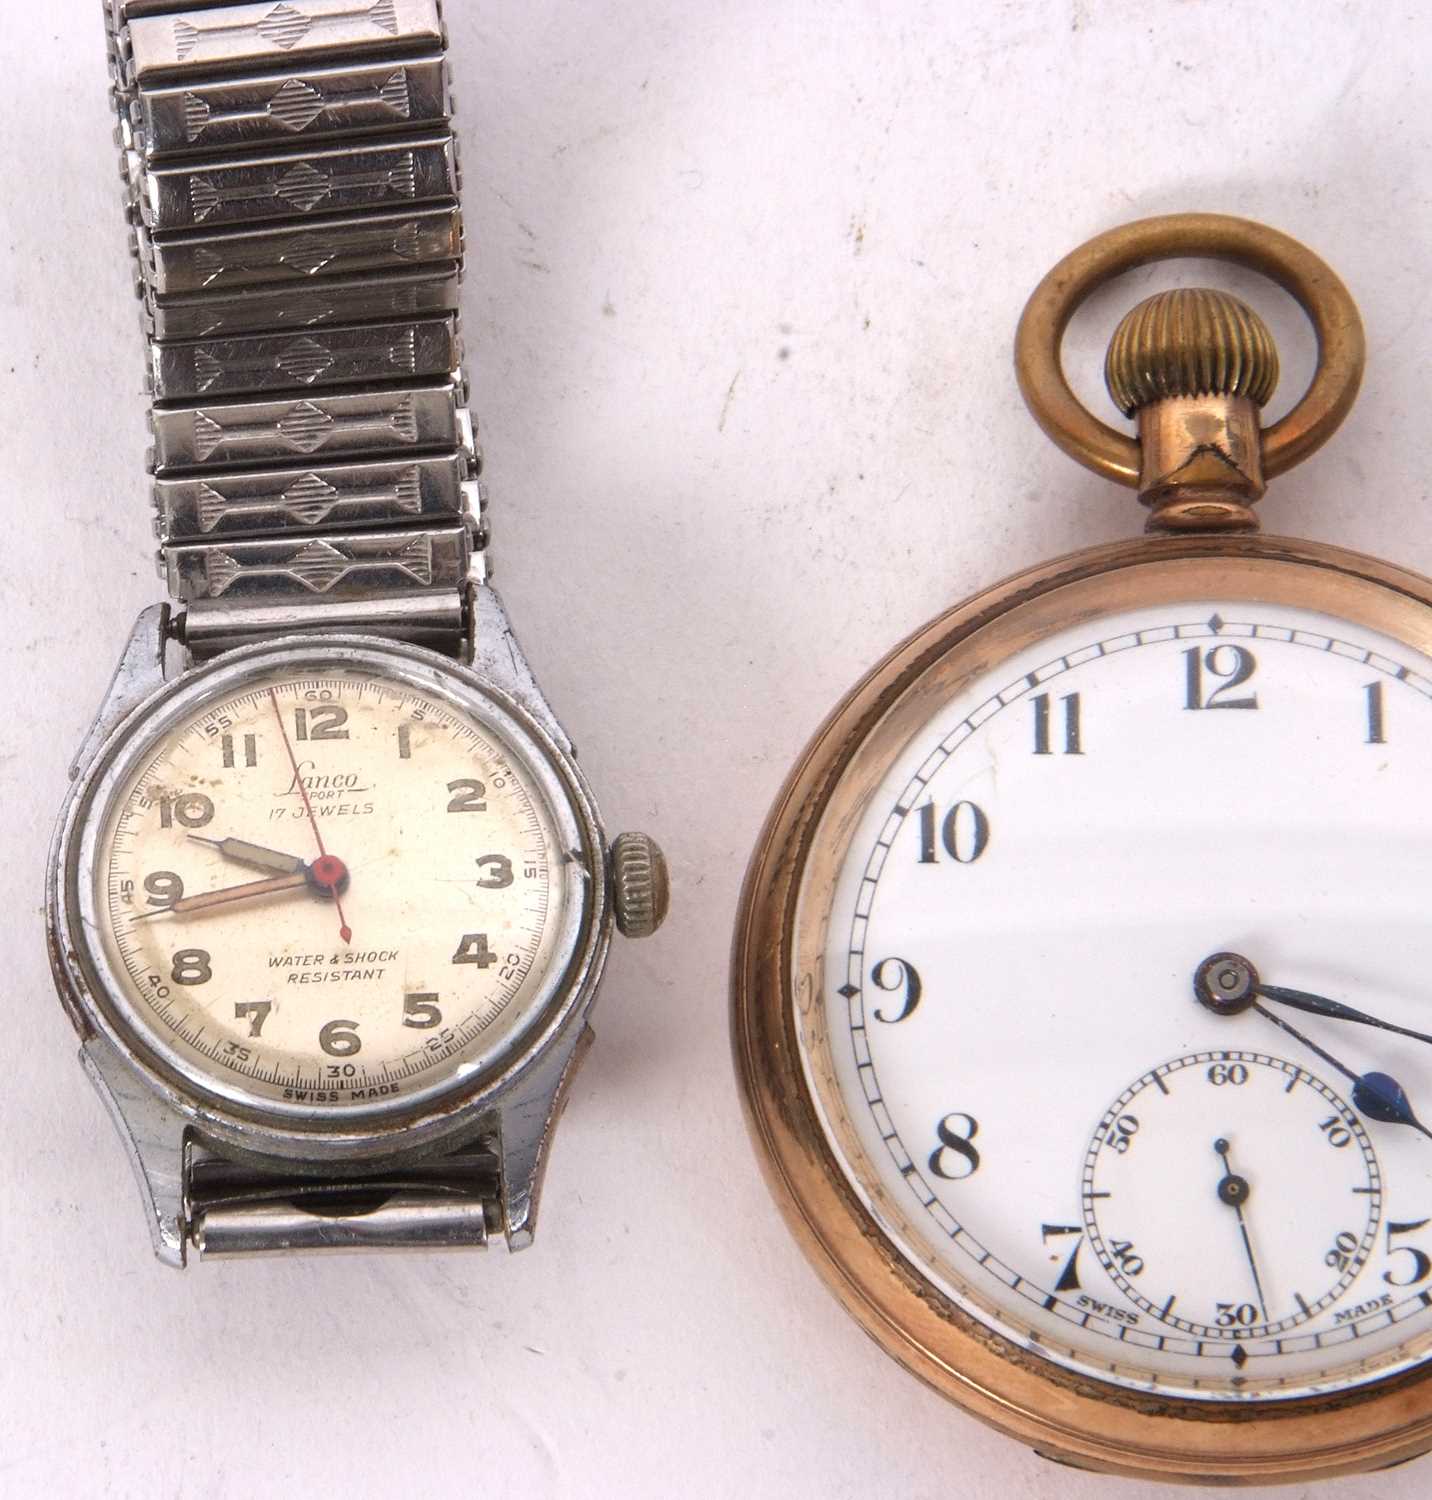 Mixed Lot: Two wristwatches and a rolled gold pocket watch, the wristwatches are a ladies Roma and a - Image 2 of 4